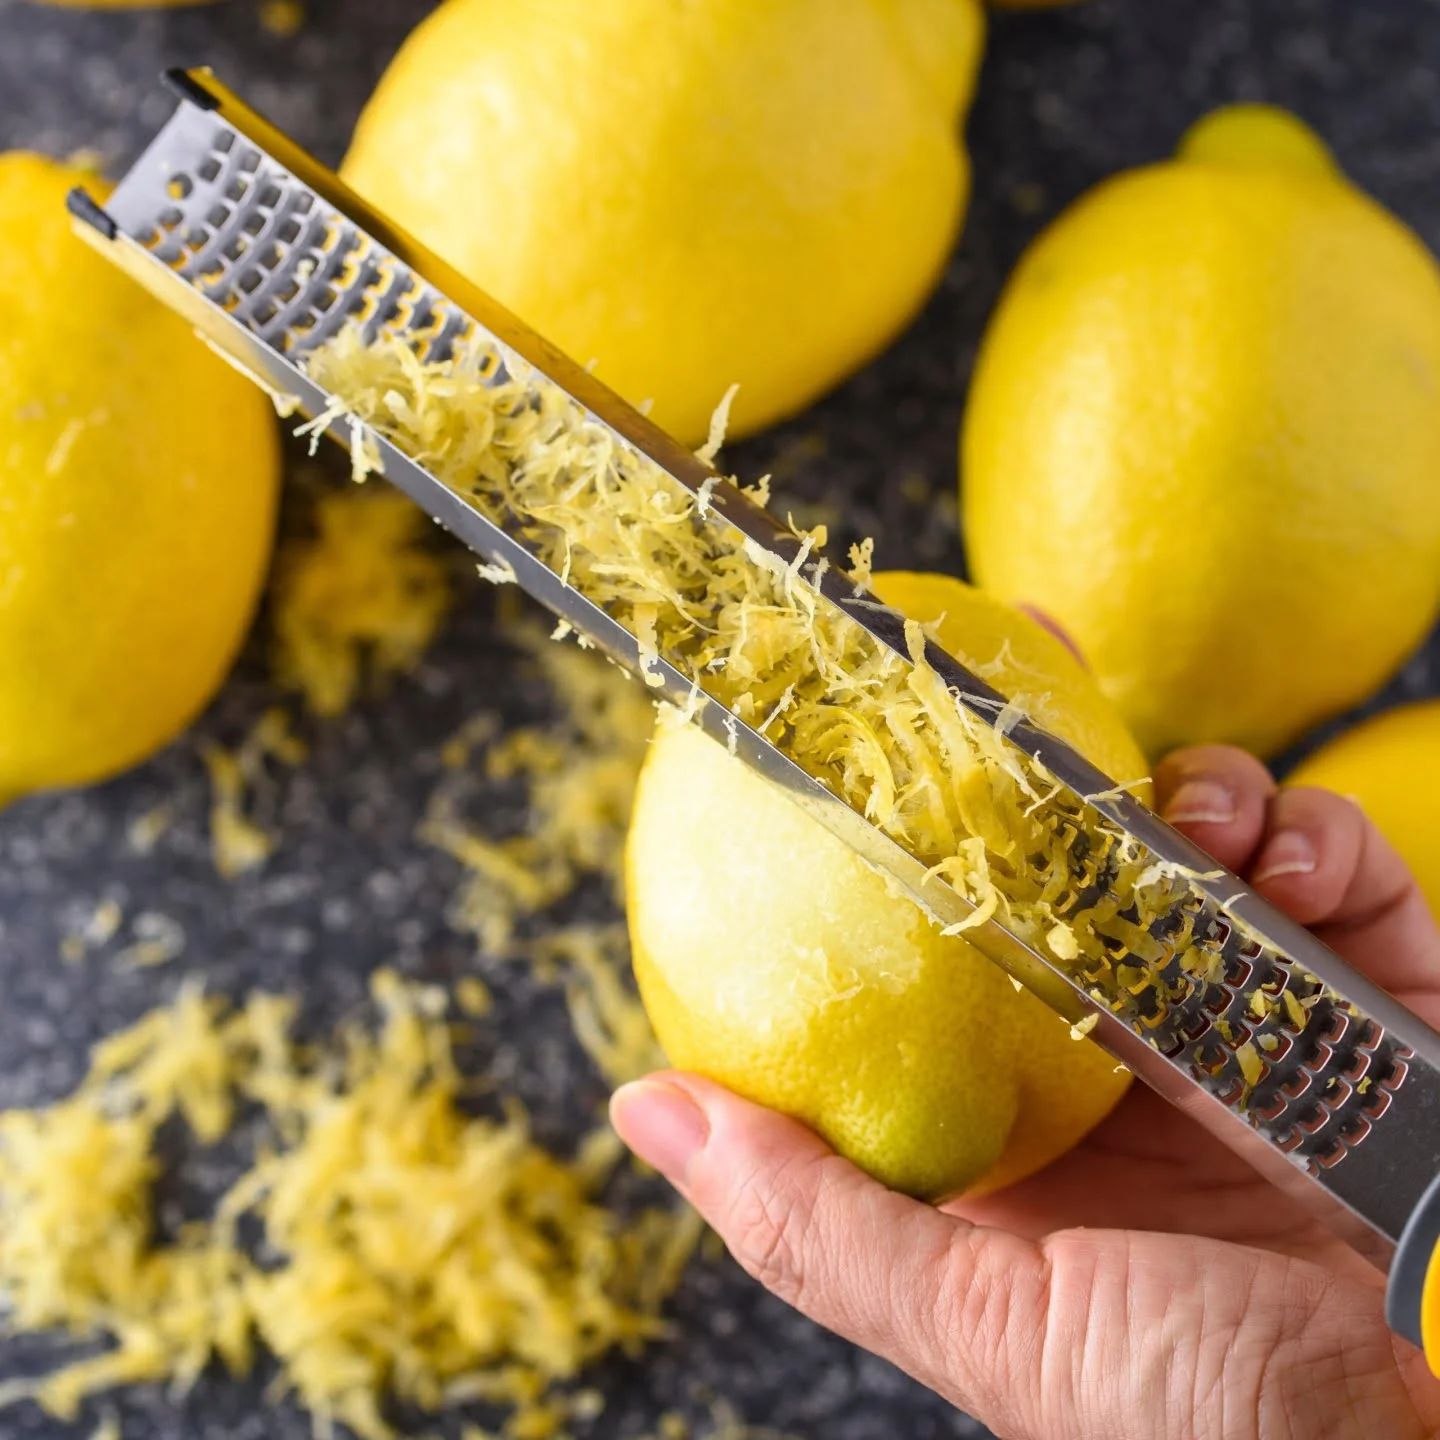 How to zest a lemon step-by-step